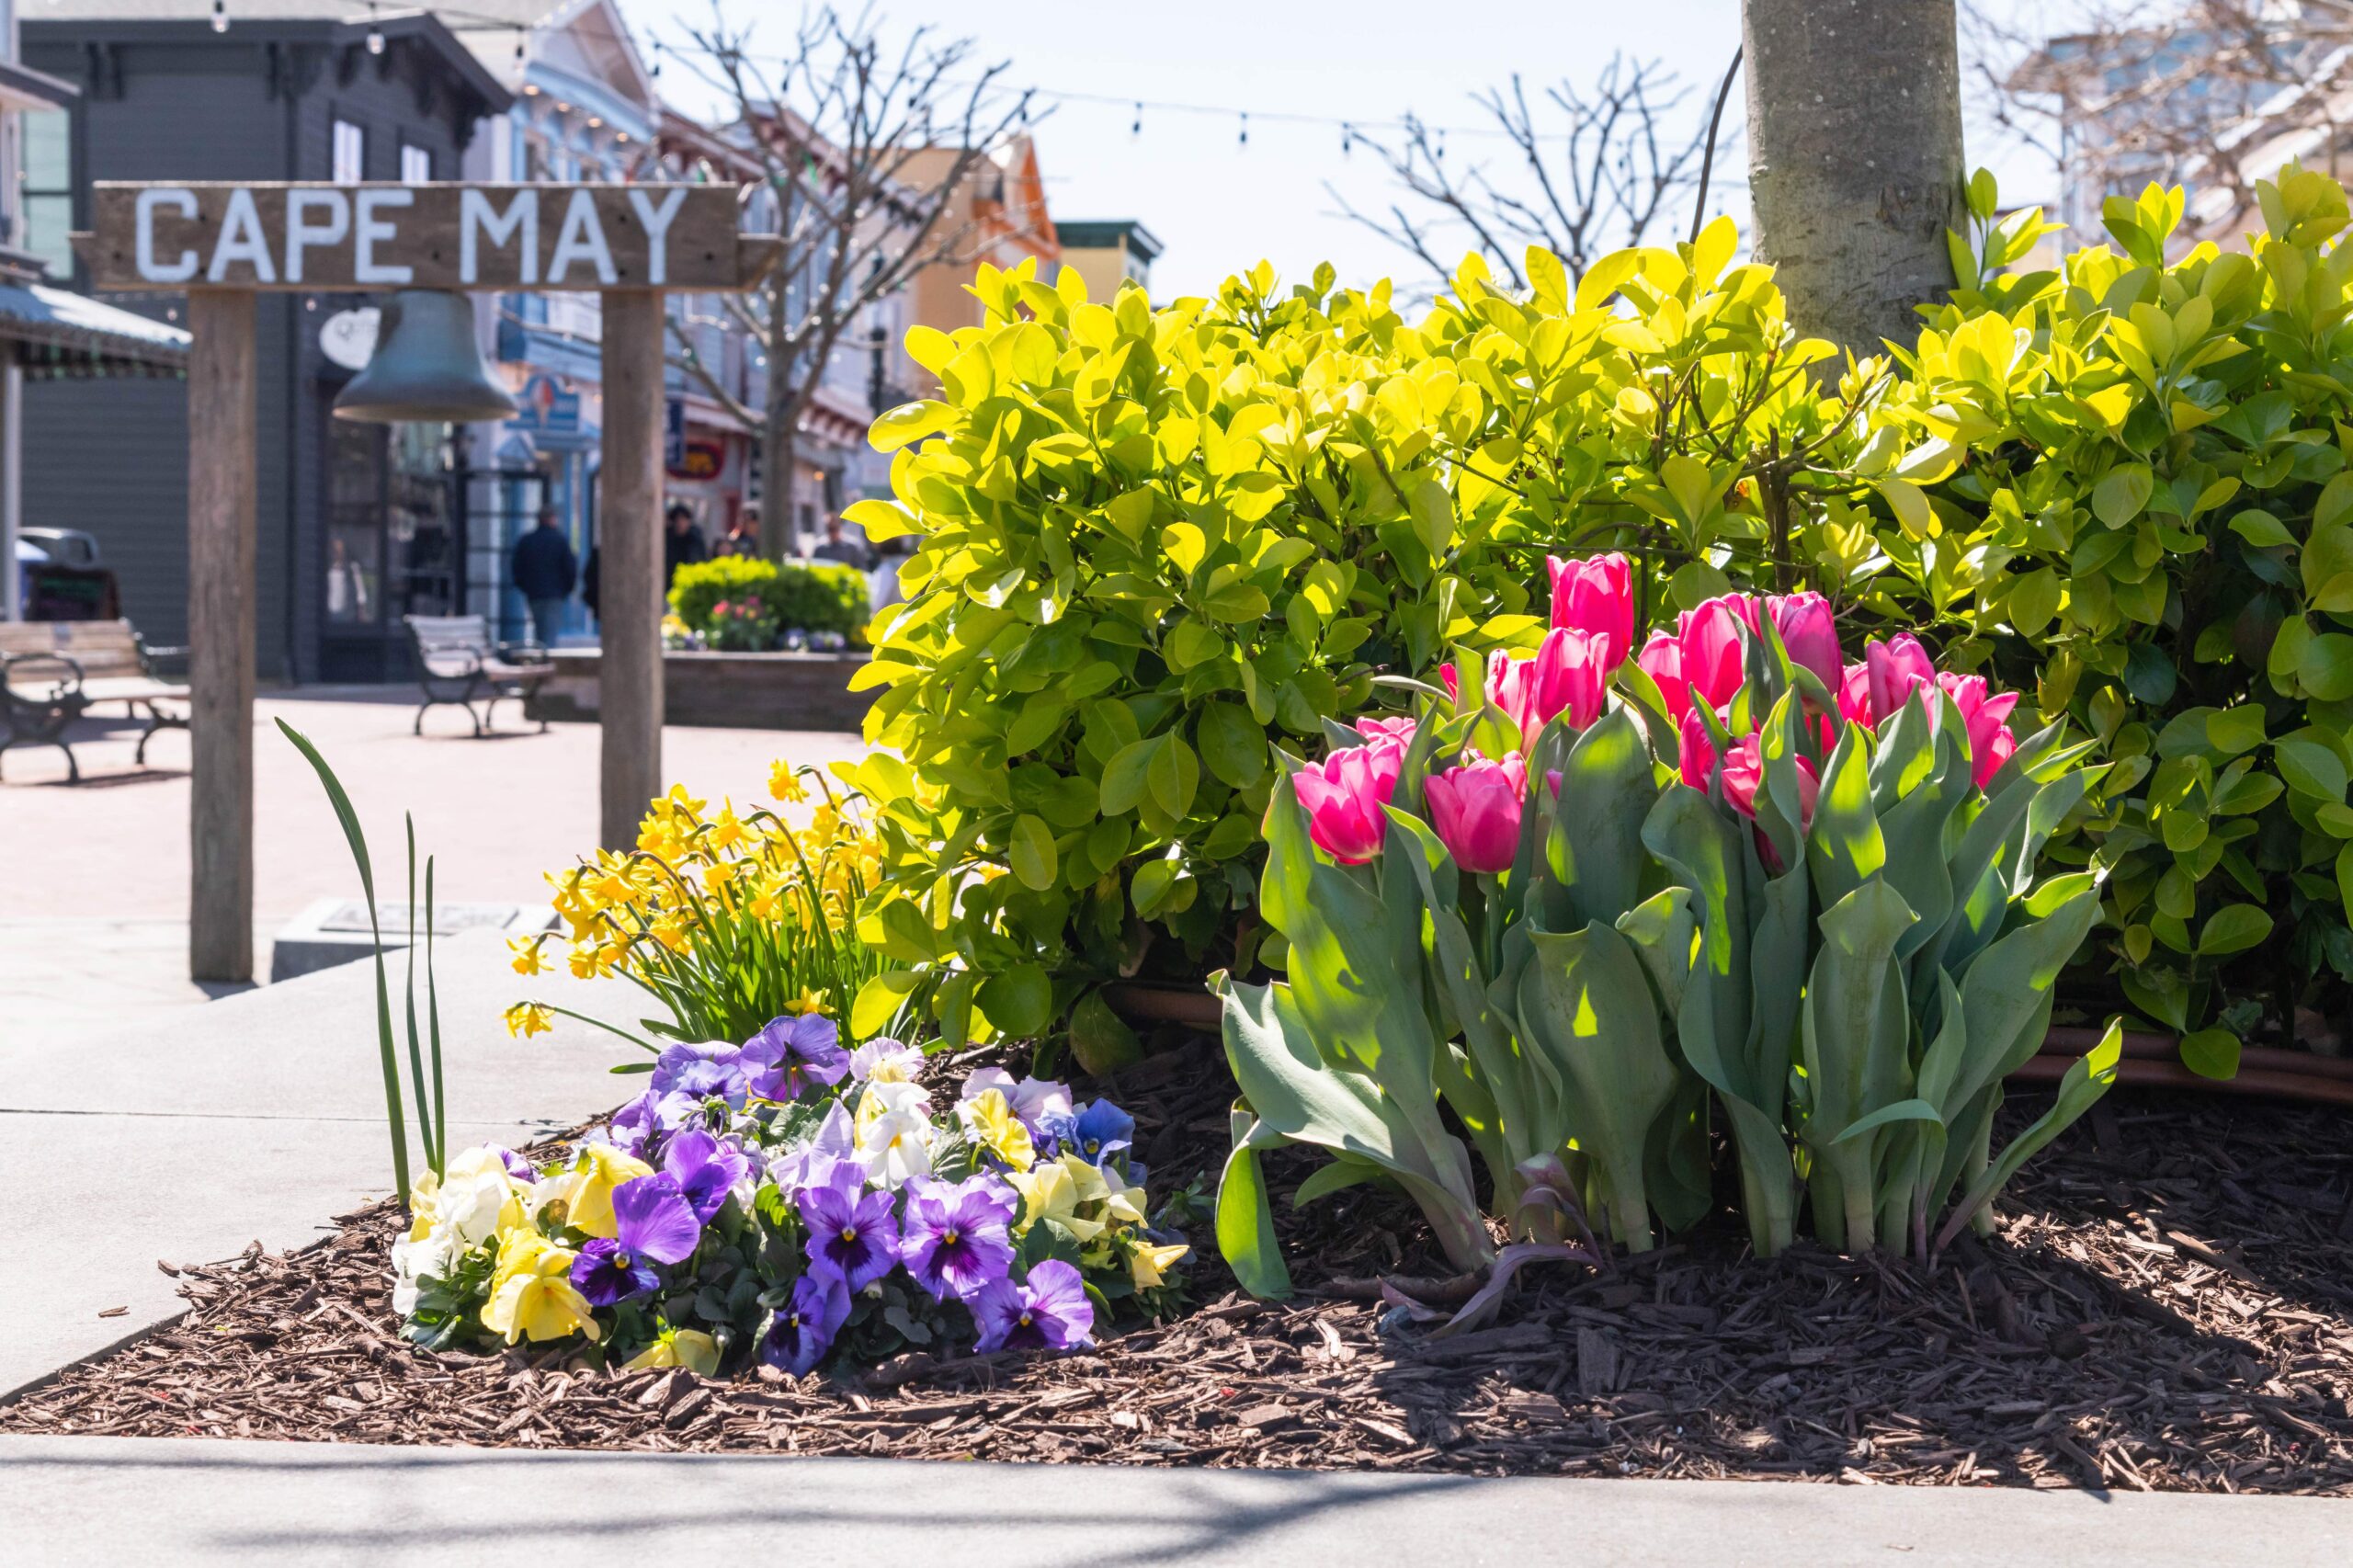 Pink tulips, yellow daffodils, and yellow and purple pansies in front of the Cape May sign on the Washington Street Mall